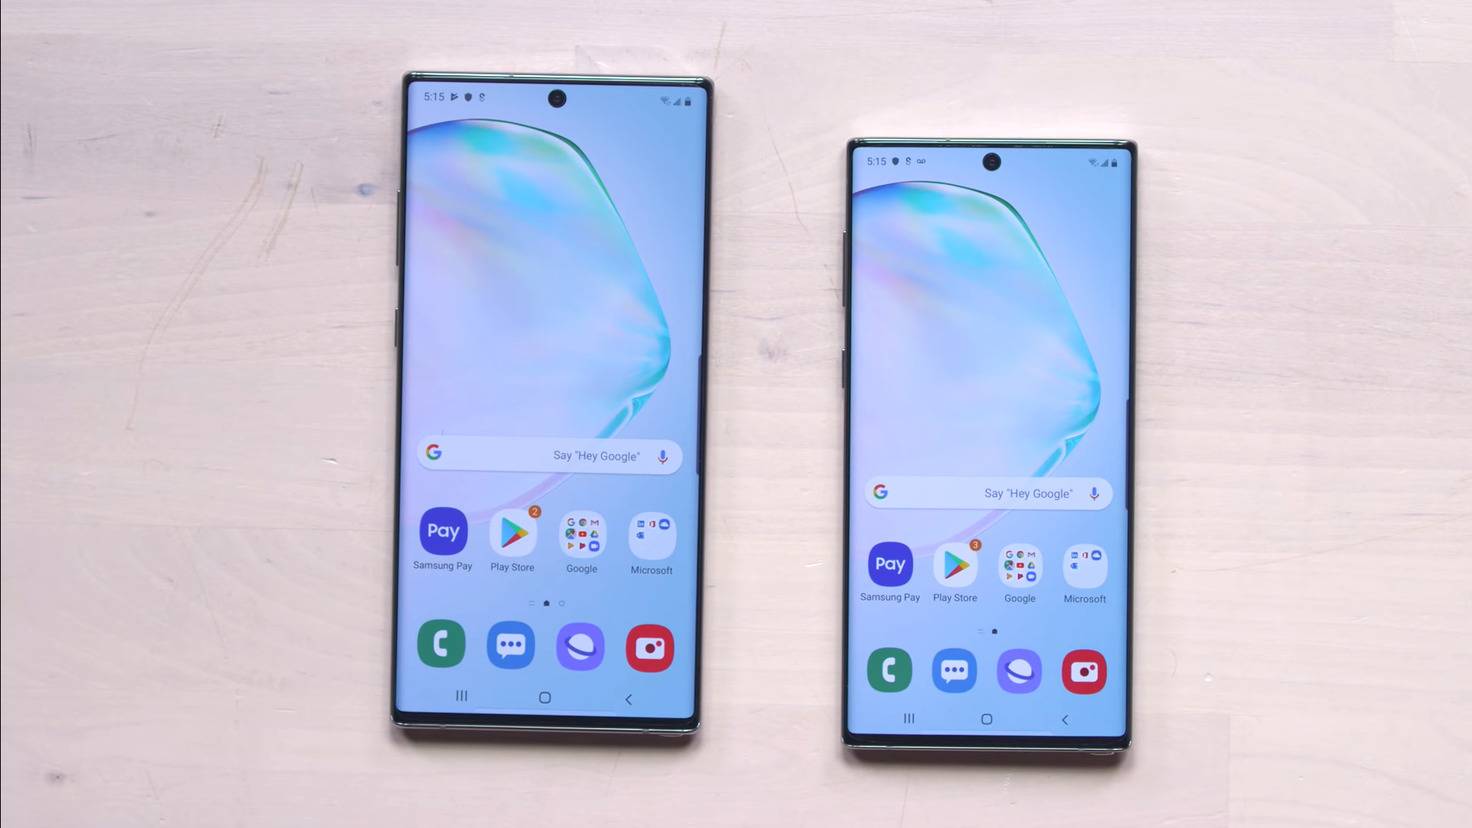 Galaxy Note 10 vs Galaxy Note 9 Comparison Should You Upgrade or Stay With the Older Model